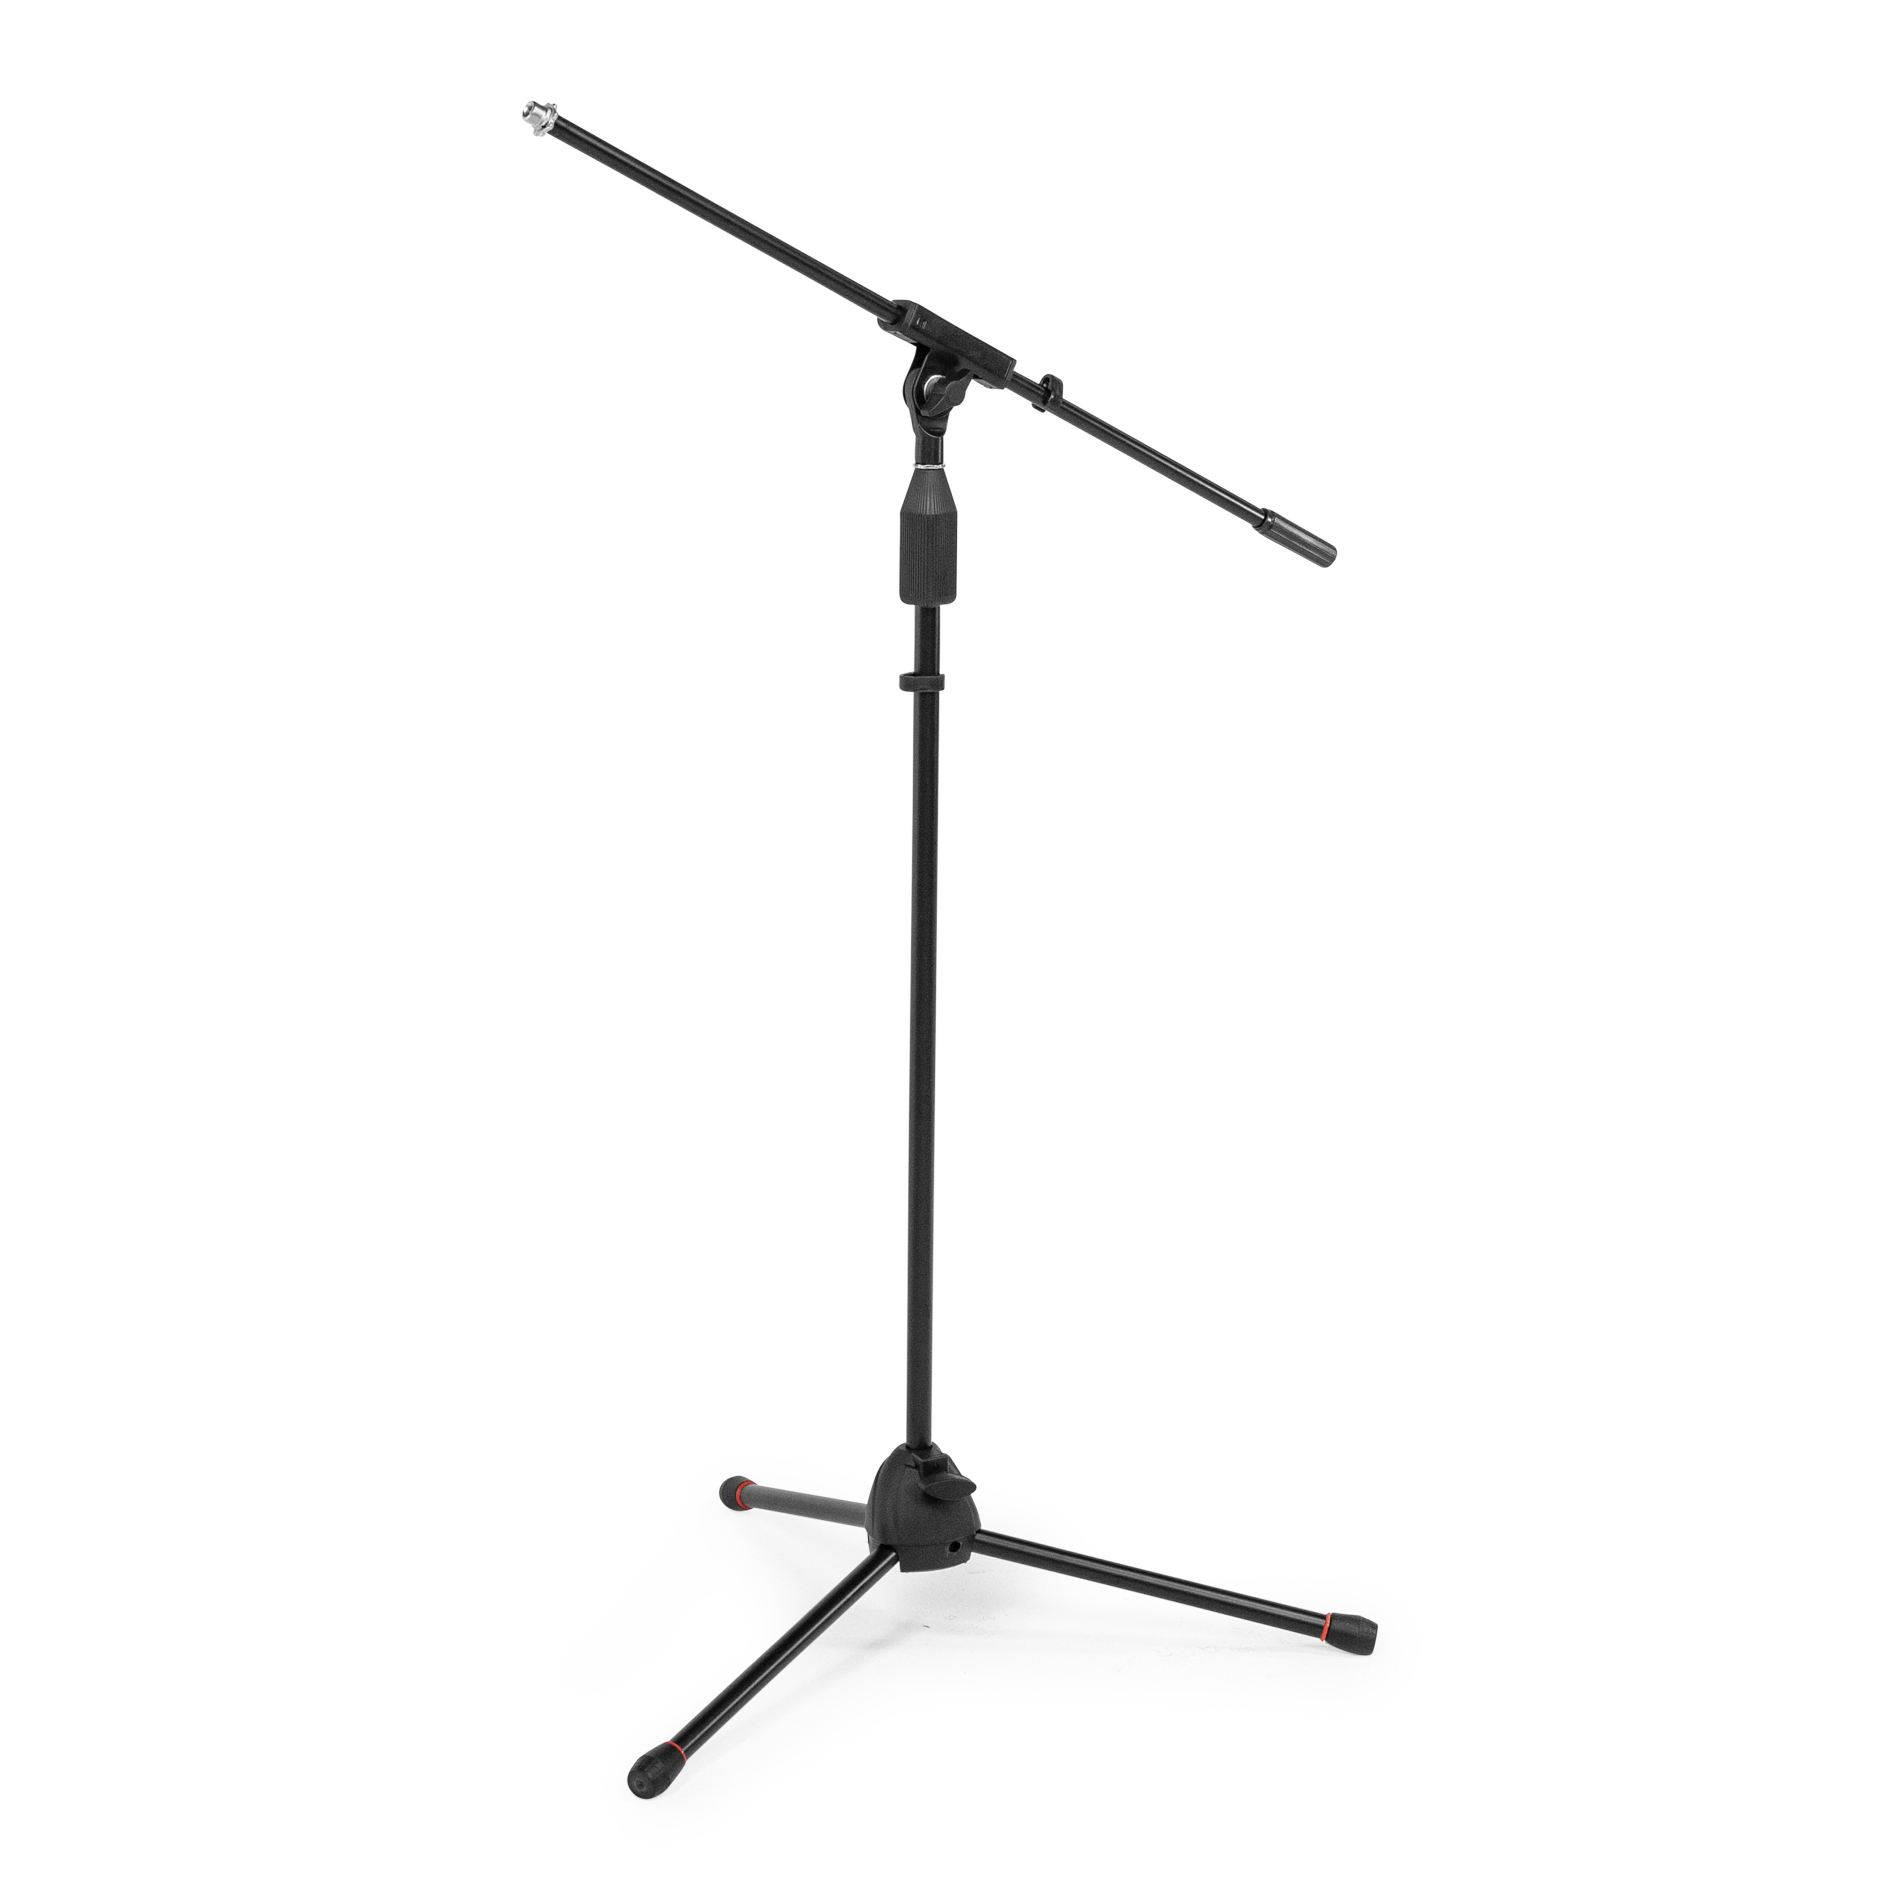 6-Pack of Mic Stands with Carry Bag-GFW-MIC-6PACKBG